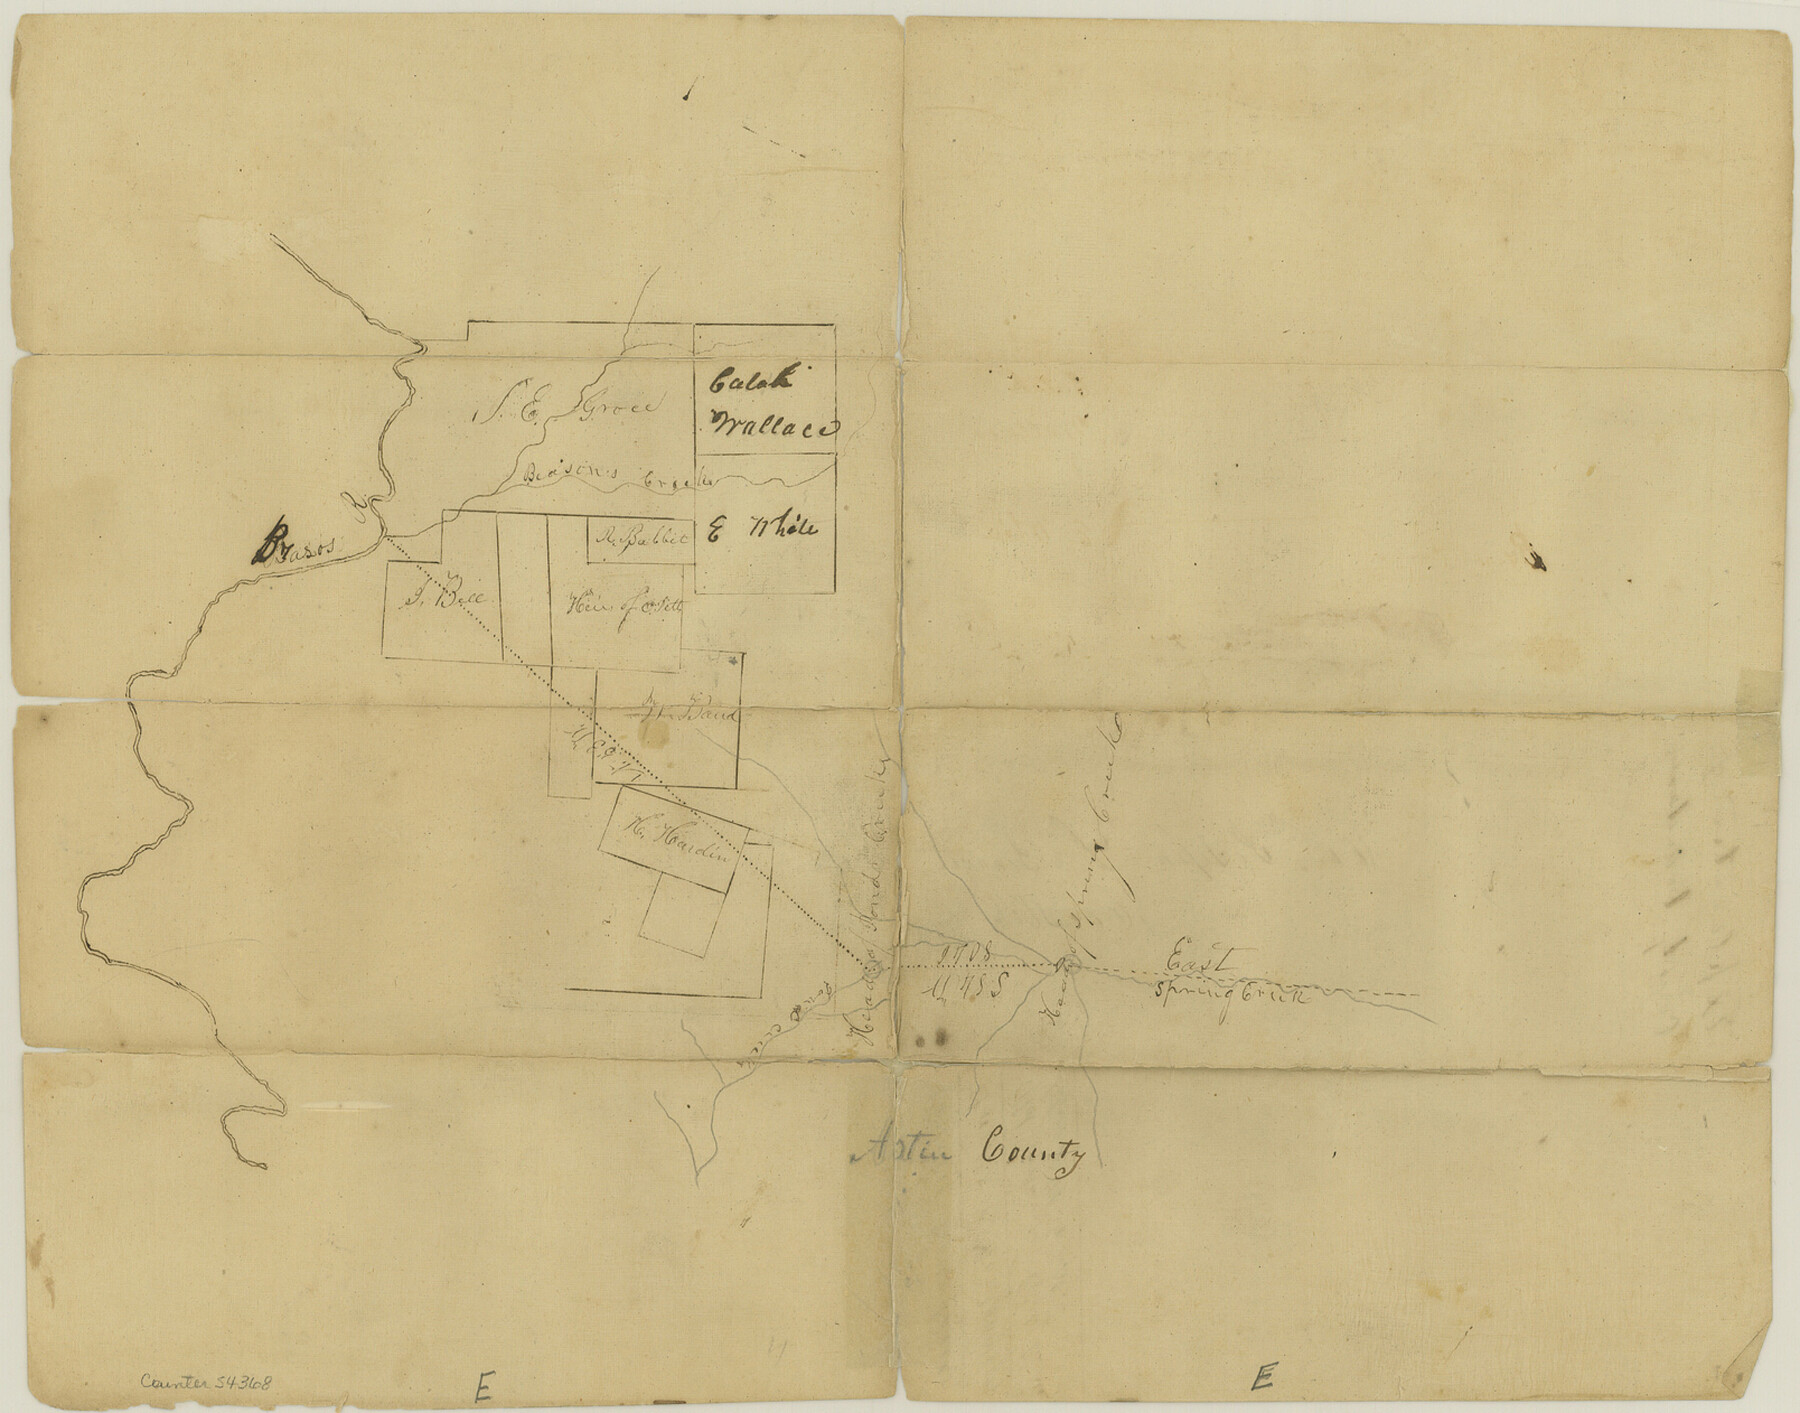 54368, Harris County Boundary File 39 (22), General Map Collection